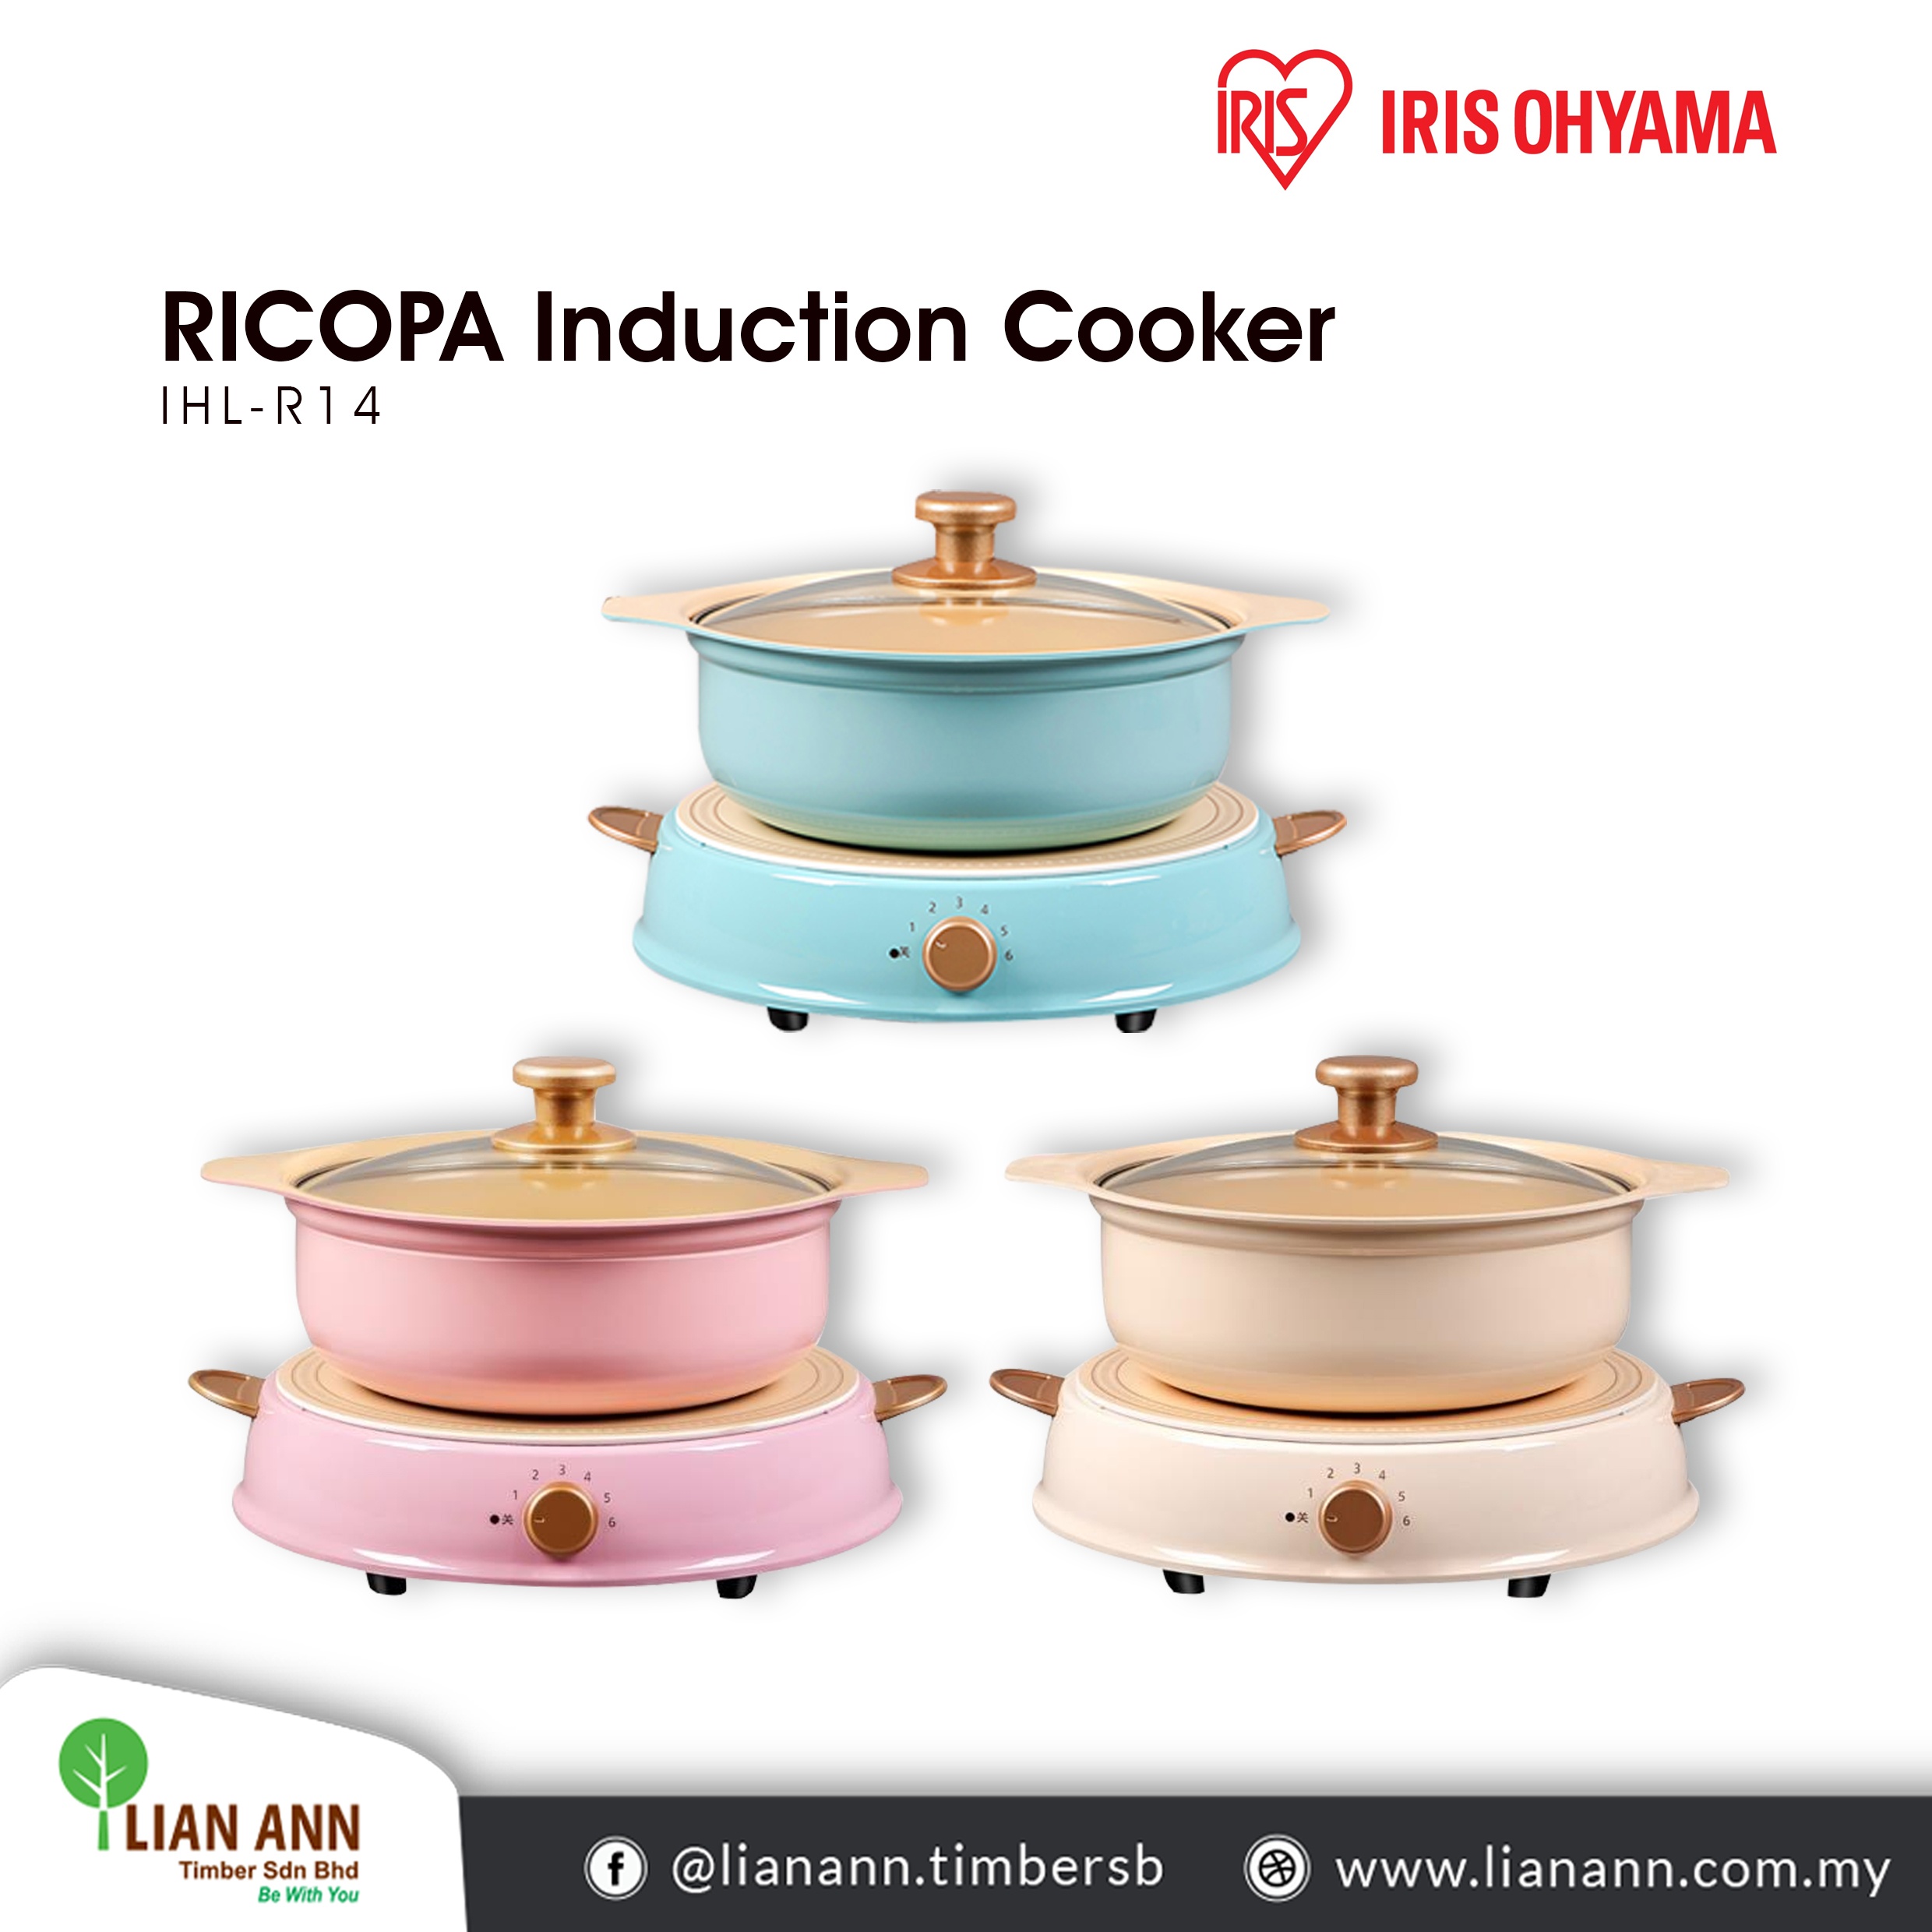 Wahlee Online Store. IRIS OHYAMA RICOPA INDUCTION COOKER IHL-R14CI / R14P